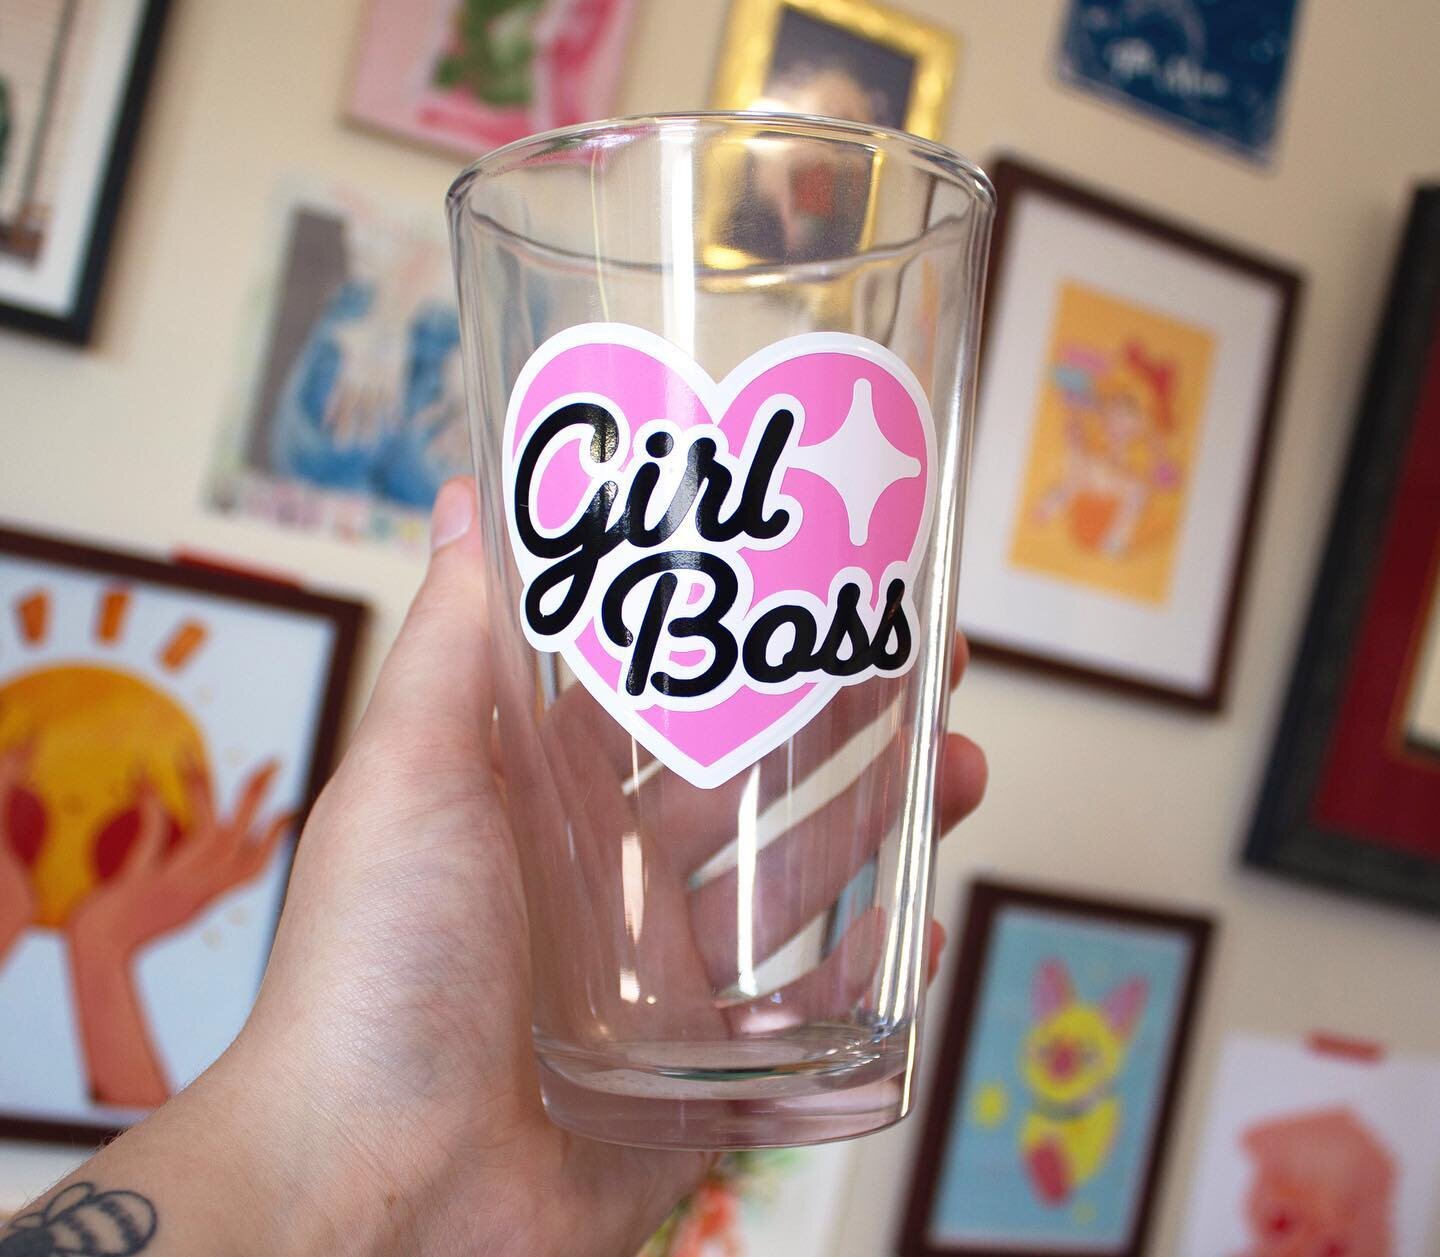 Girl Boss drinking glasses are back in stock!! Treat yourself💕 

🌸link in my bio🌸

#etsy #etsyshop #etsysellersofinstagram #etsyfinds #smallbusinessowner #smallbusiness #smallbusinesssupport #womanownedbusiness #womanownedsmallbusiness #cricut #cr